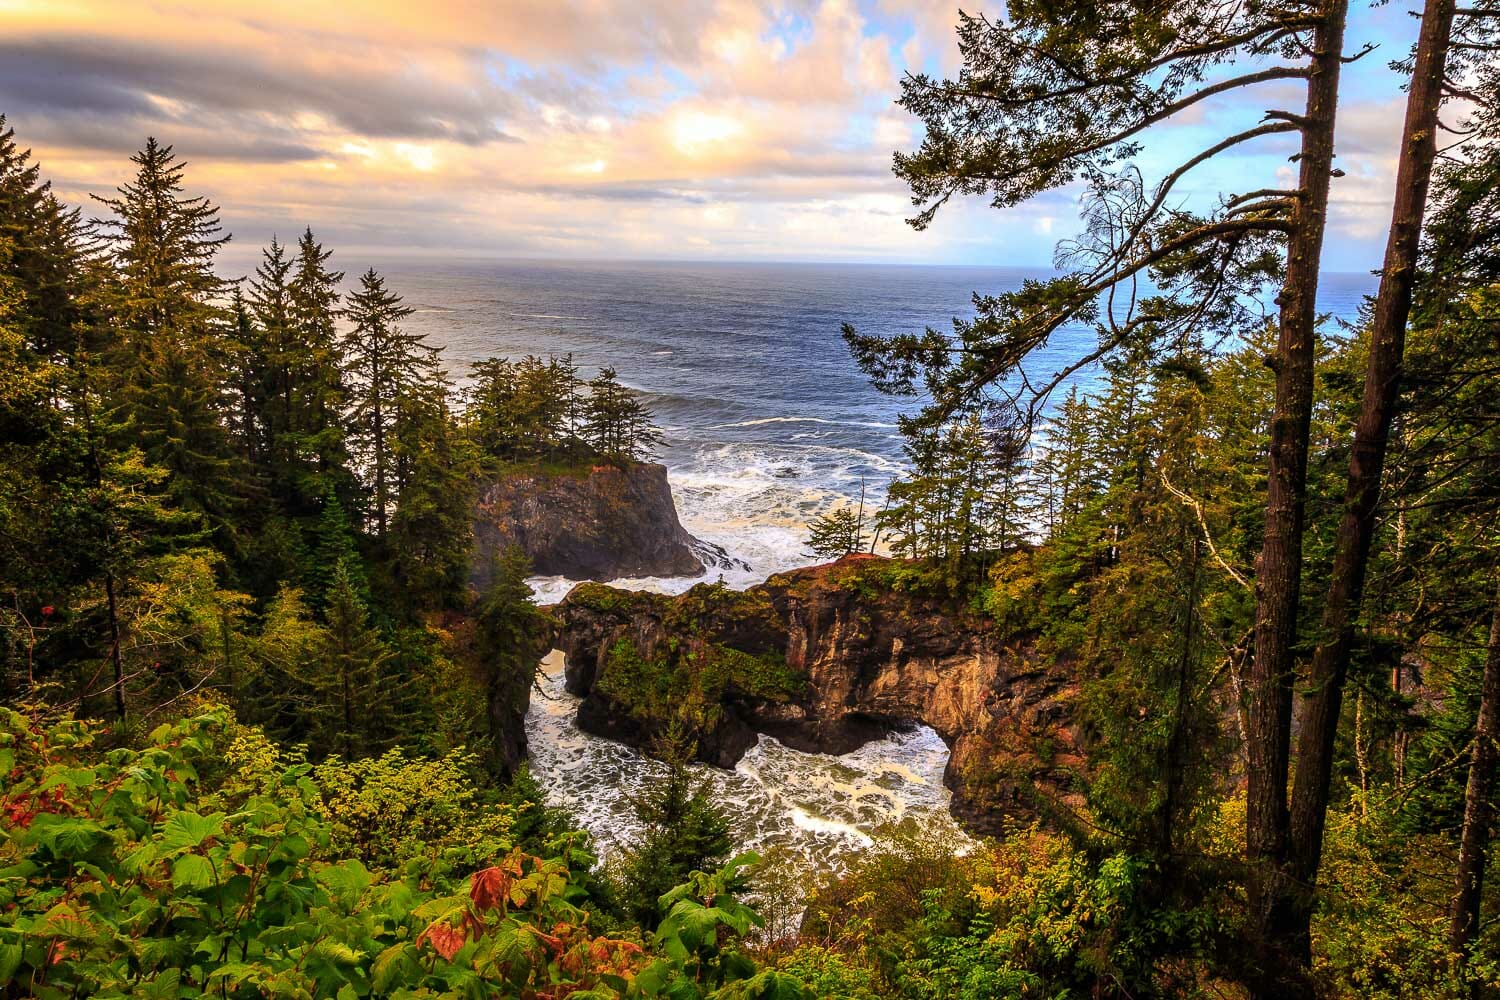 Scenic view of rugged Oregon coastline with trees and ocean